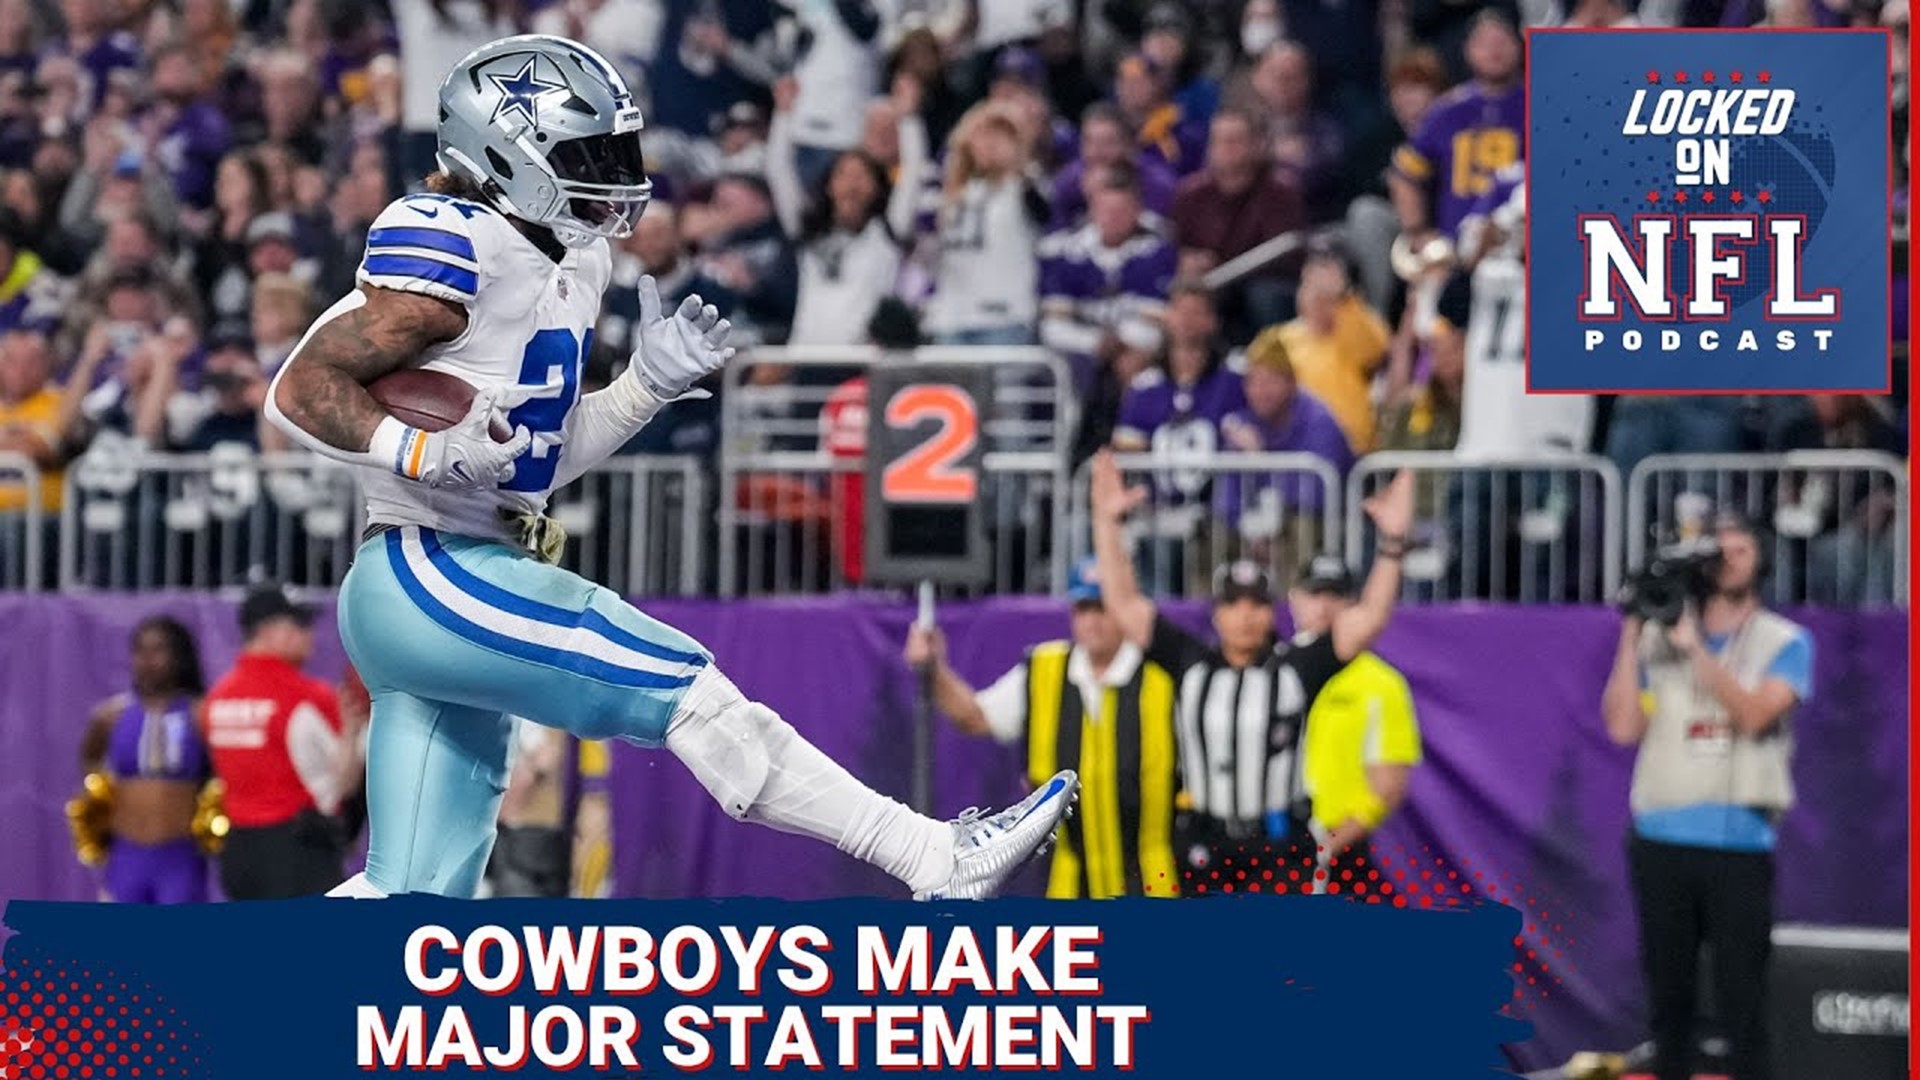 The Dallas Cowboys make a major statement against the Minnesota Vikings in blowout Week 11 win